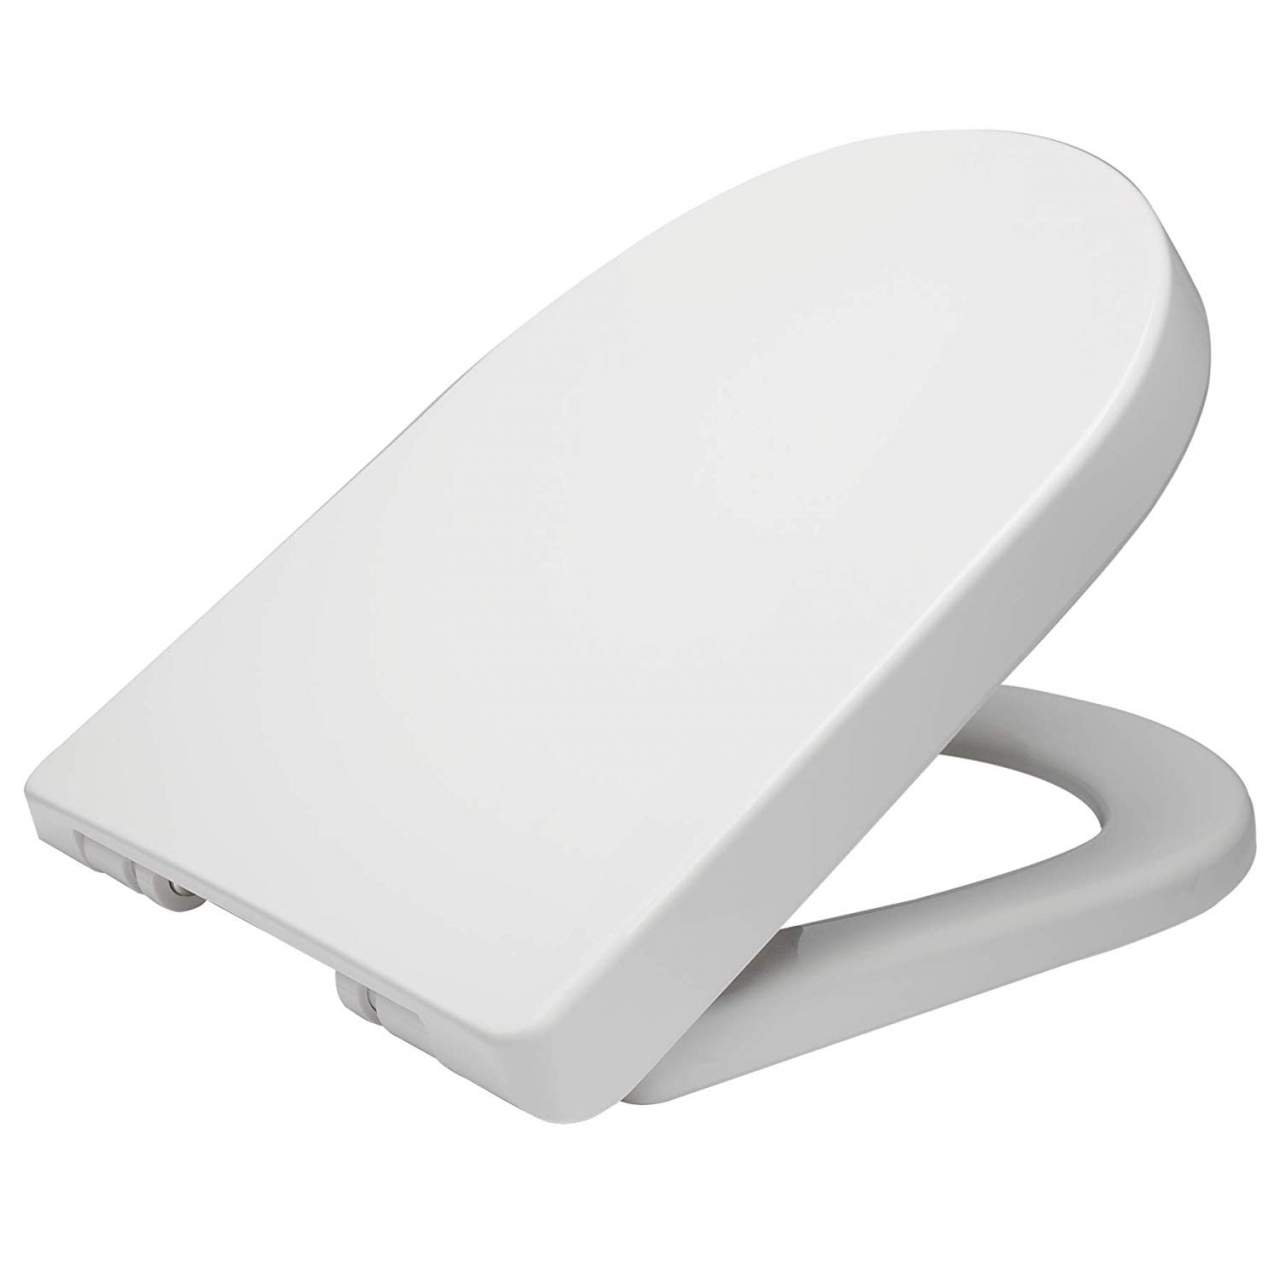 WOLTU Toilet Seat Soft Close Adjustable Hinge Toilet Lid Cover for Family Bathroom